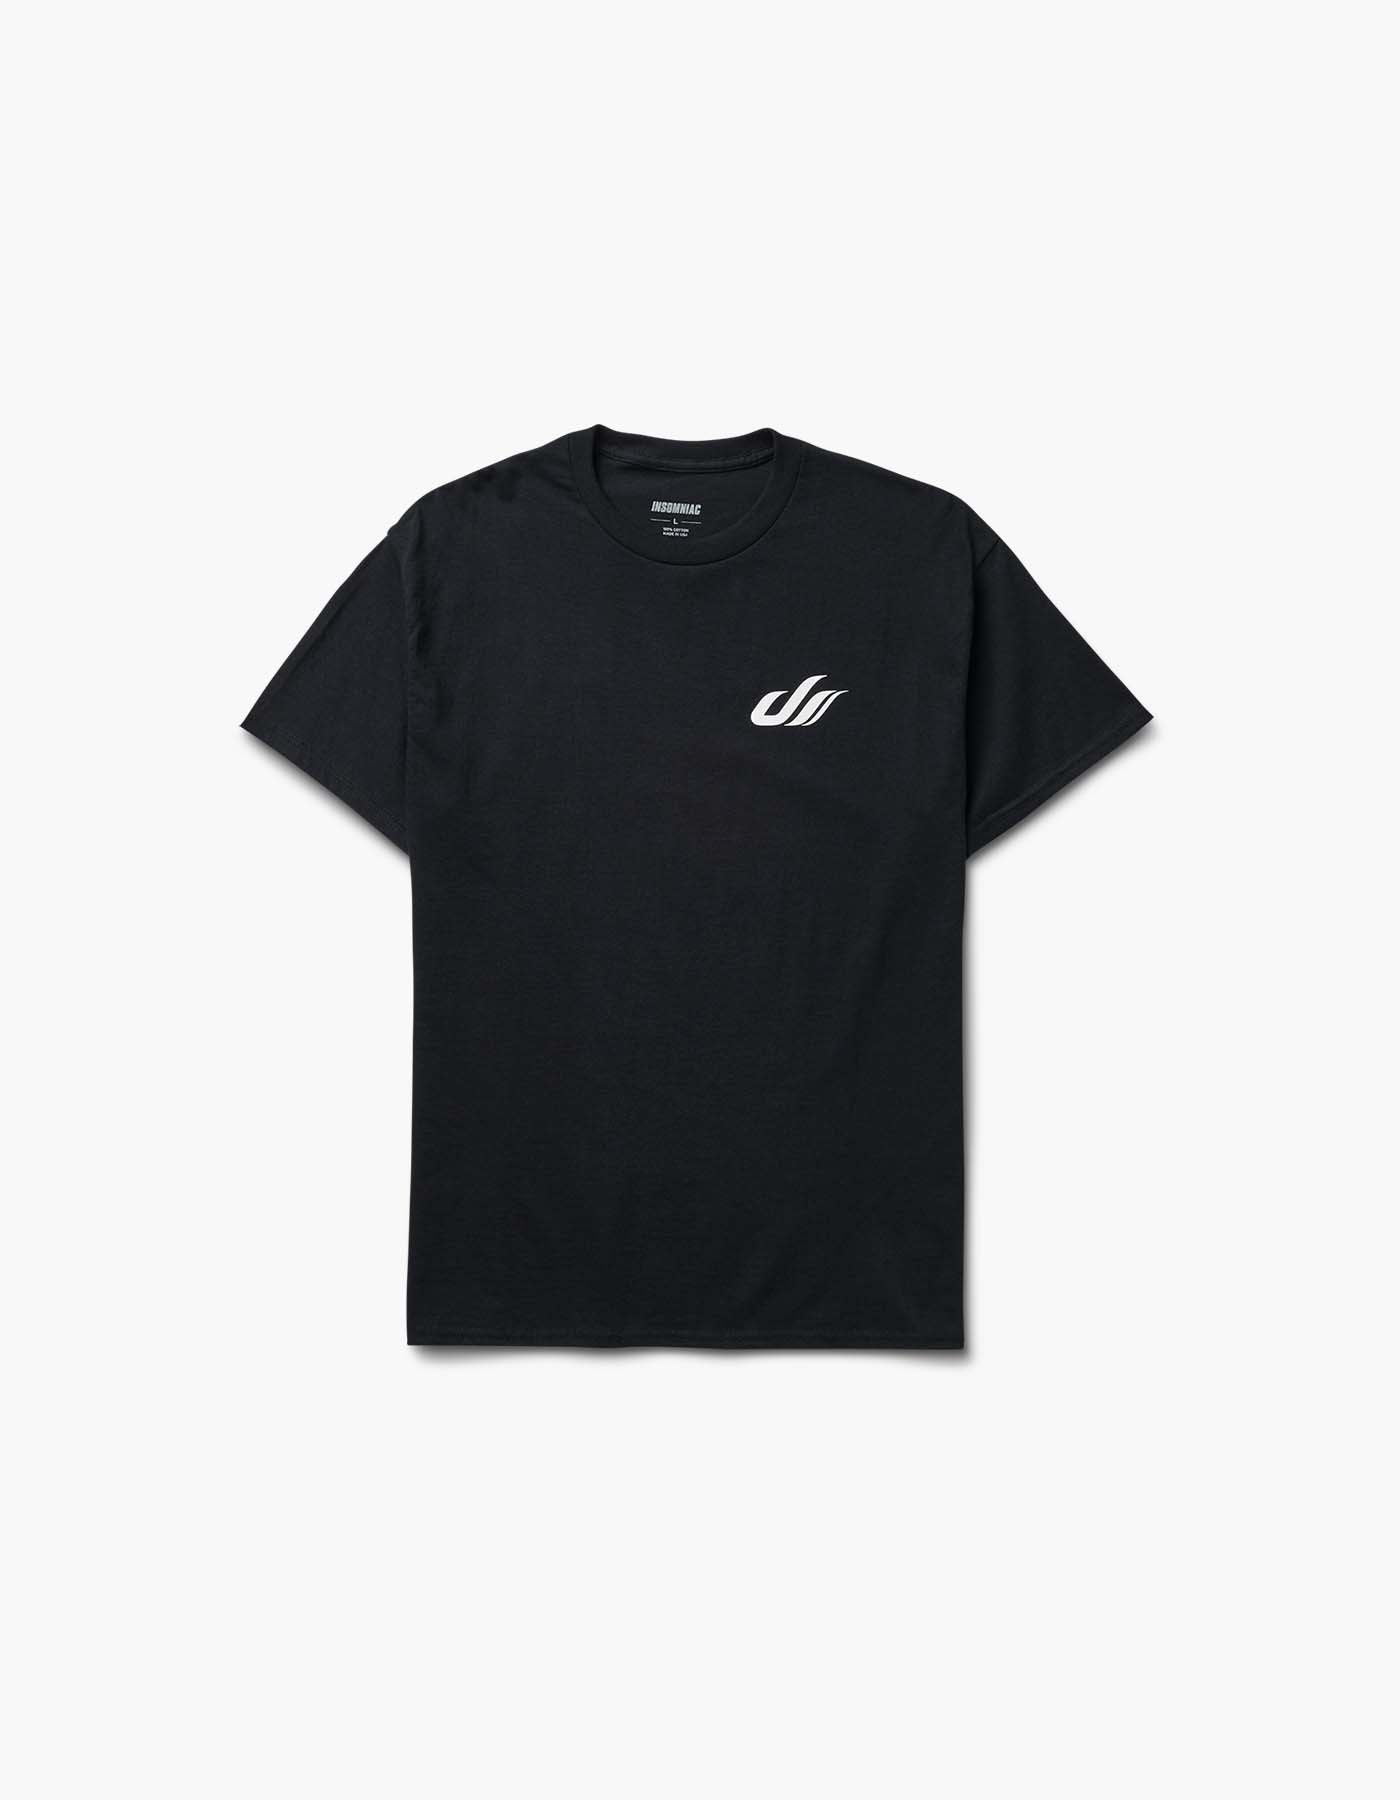 Dreamstate Classic S/S Tee